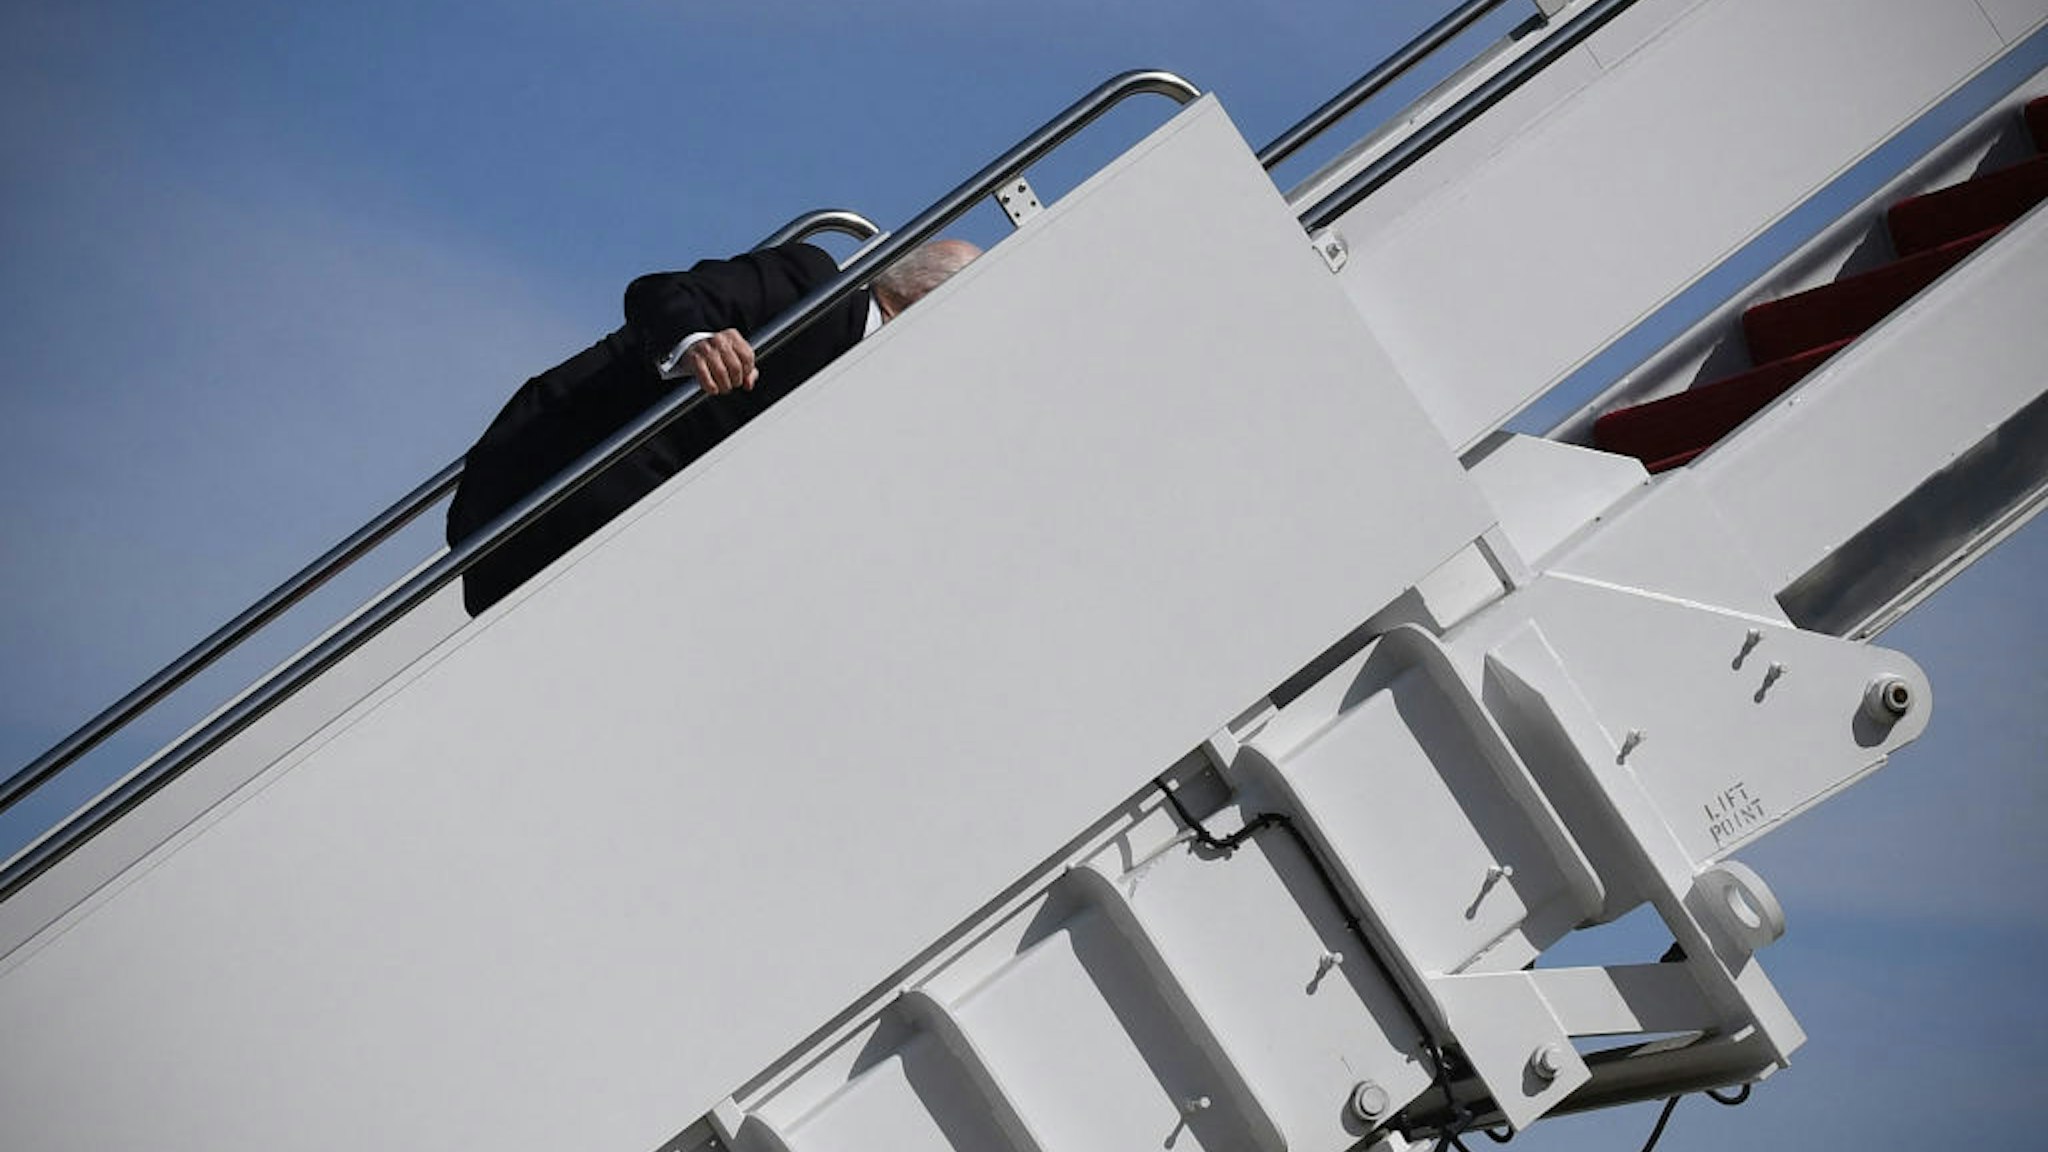 US President Joe Biden trips while boarding Air Force One at Joint Base Andrews in Maryland on March 19, 2021. - President Biden travels to Atlanta, Georgia, to tour the Centers for Disease Control and Prevention, and to meet with Georgia Asian American leaders, following the Atlanta Spa shootings.